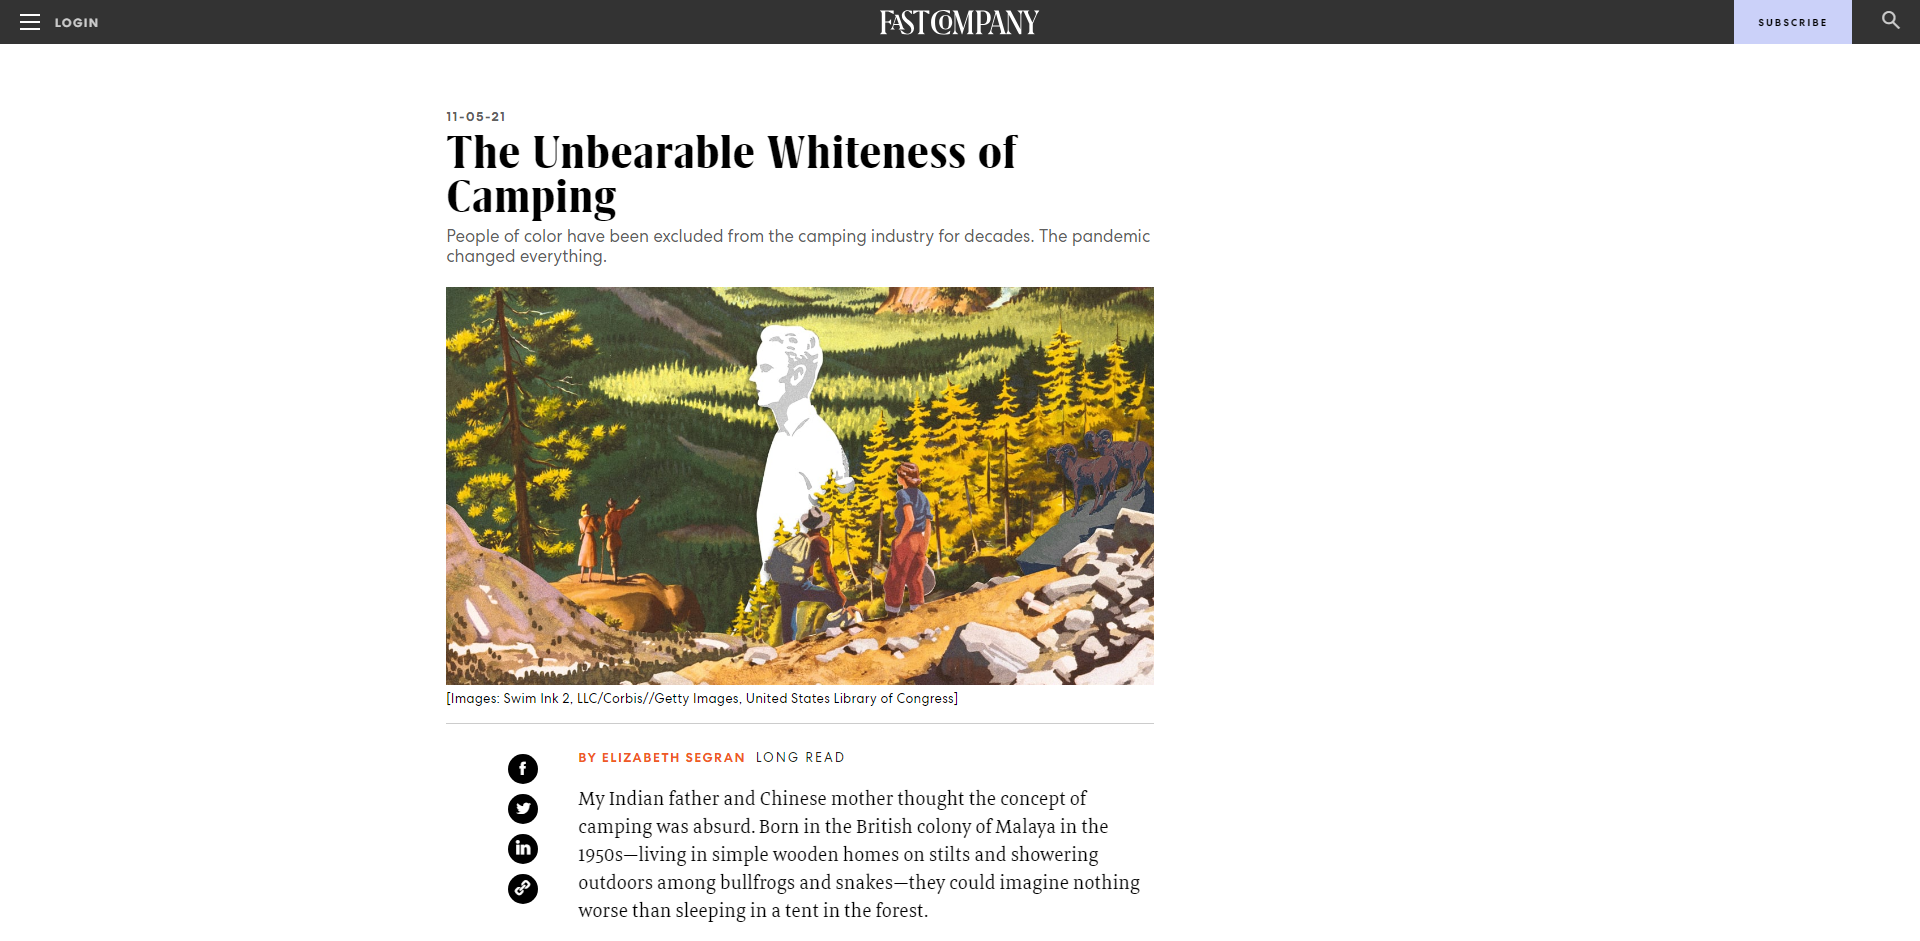 Fast Company - The Unbearable Whiteness of Camping